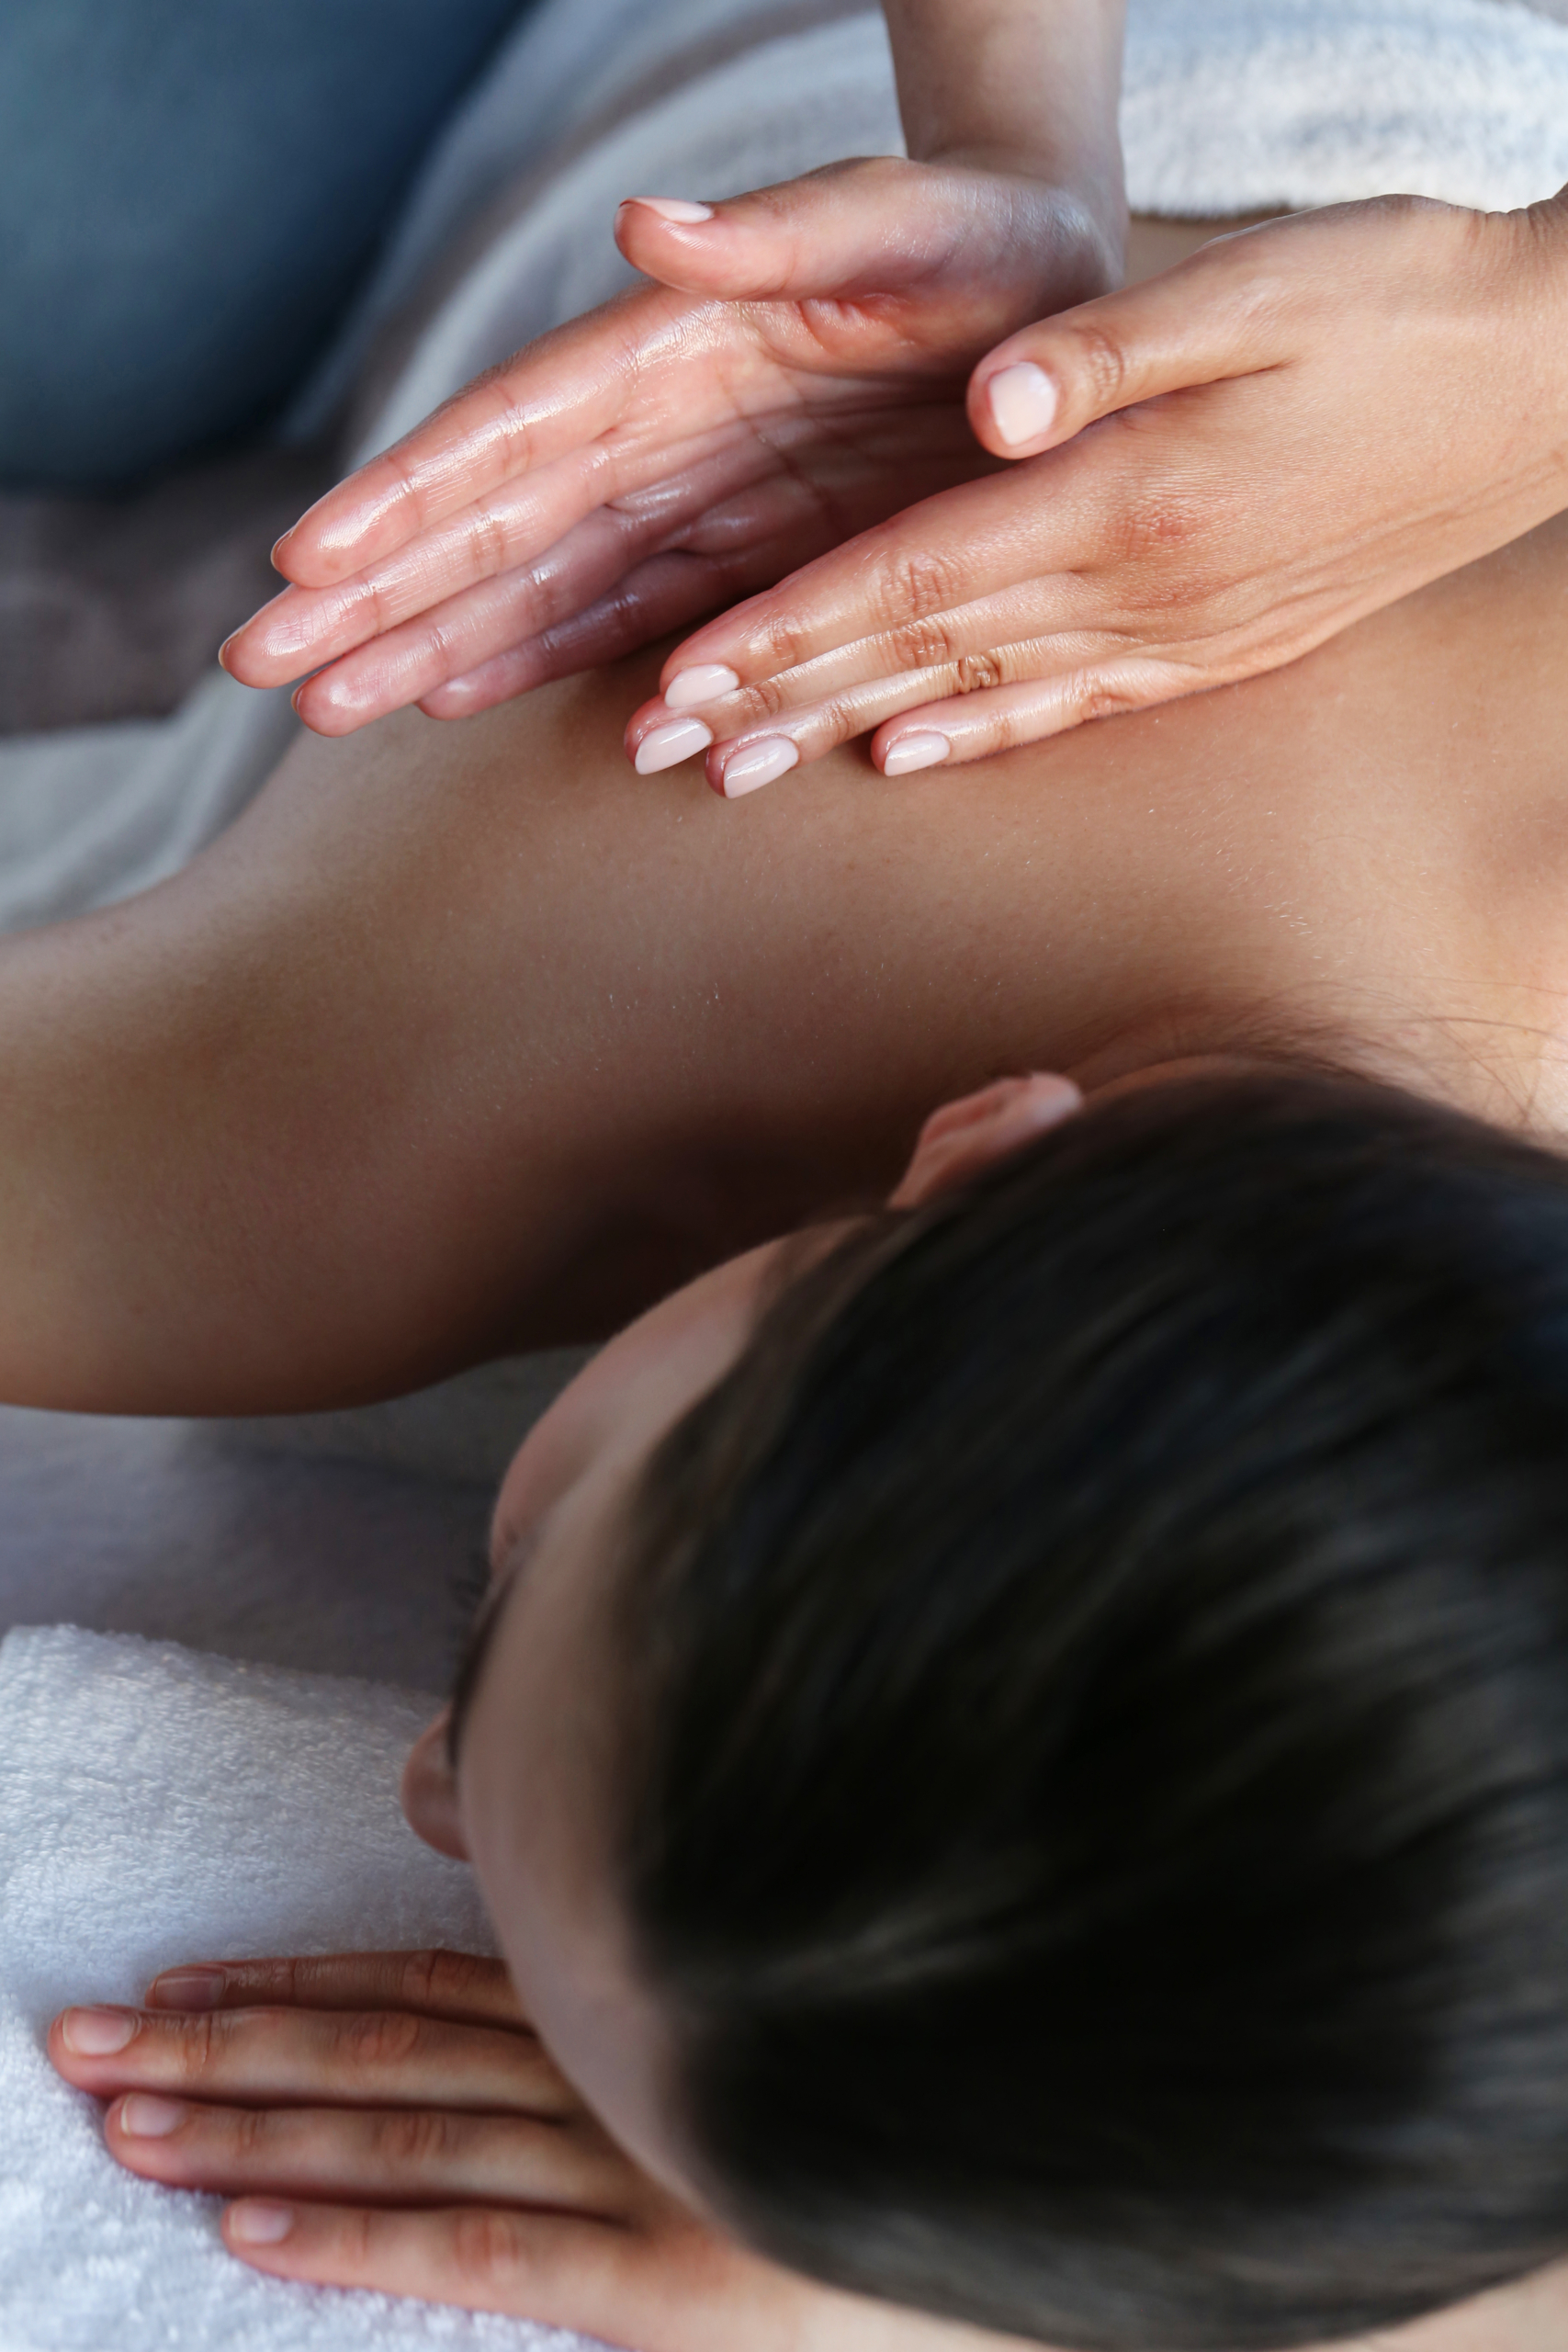 Benefits of a Relaxation Massage